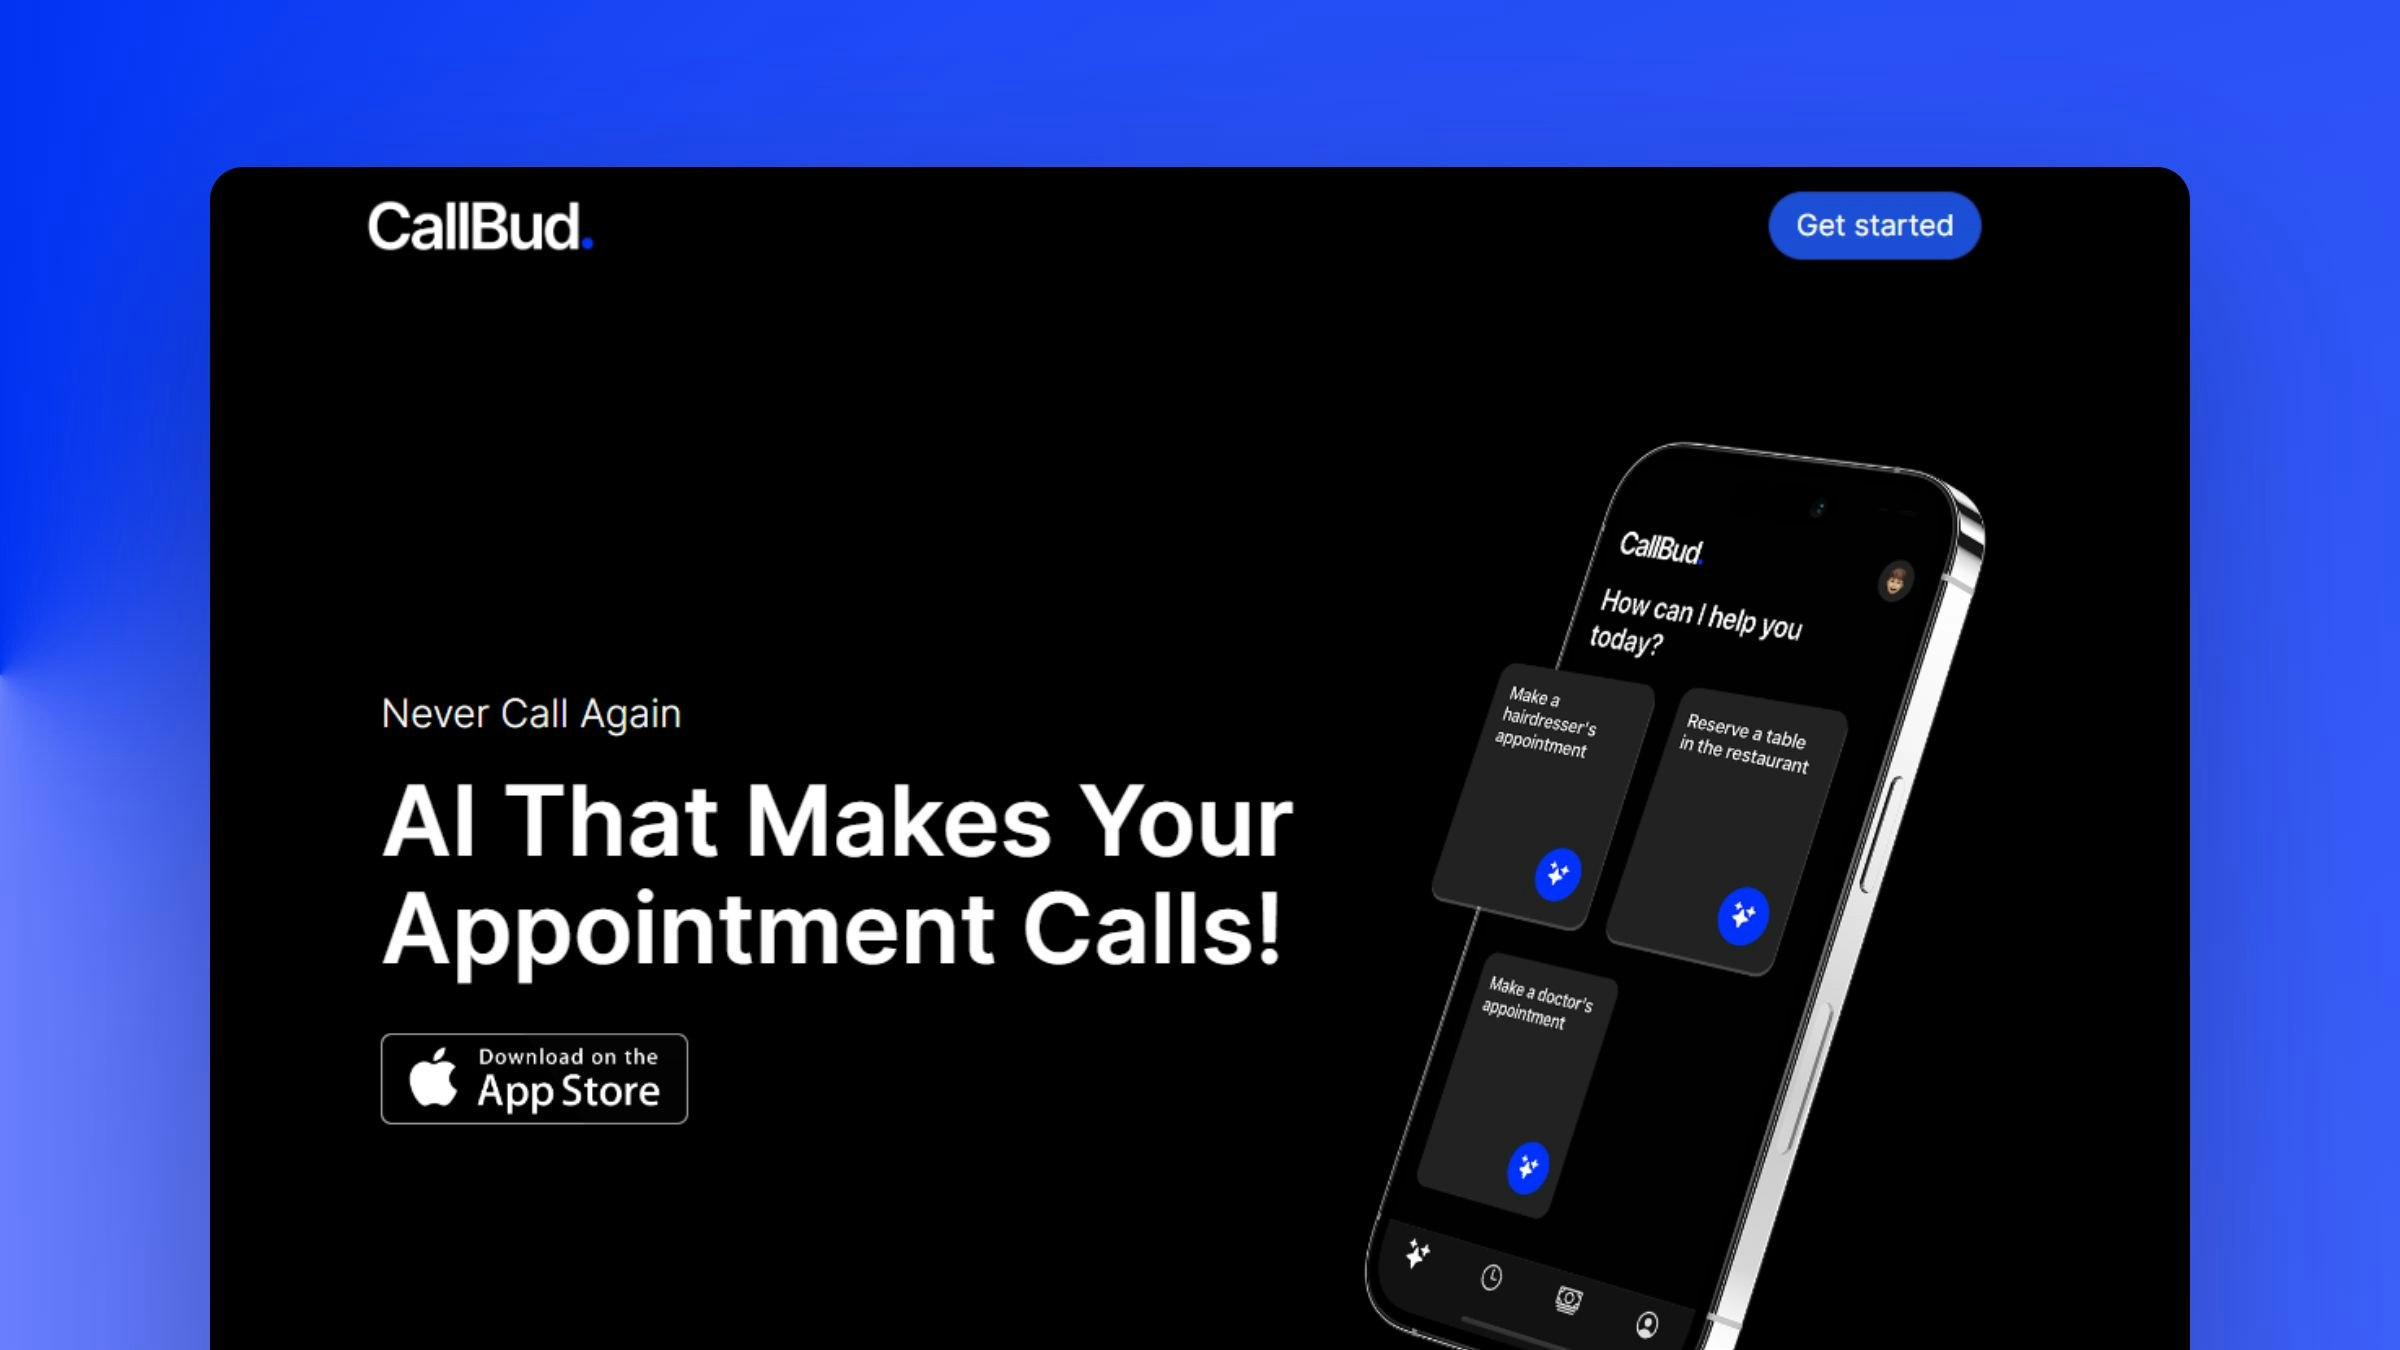 callbud-ai - AI That Makes Your Appointment Calls!